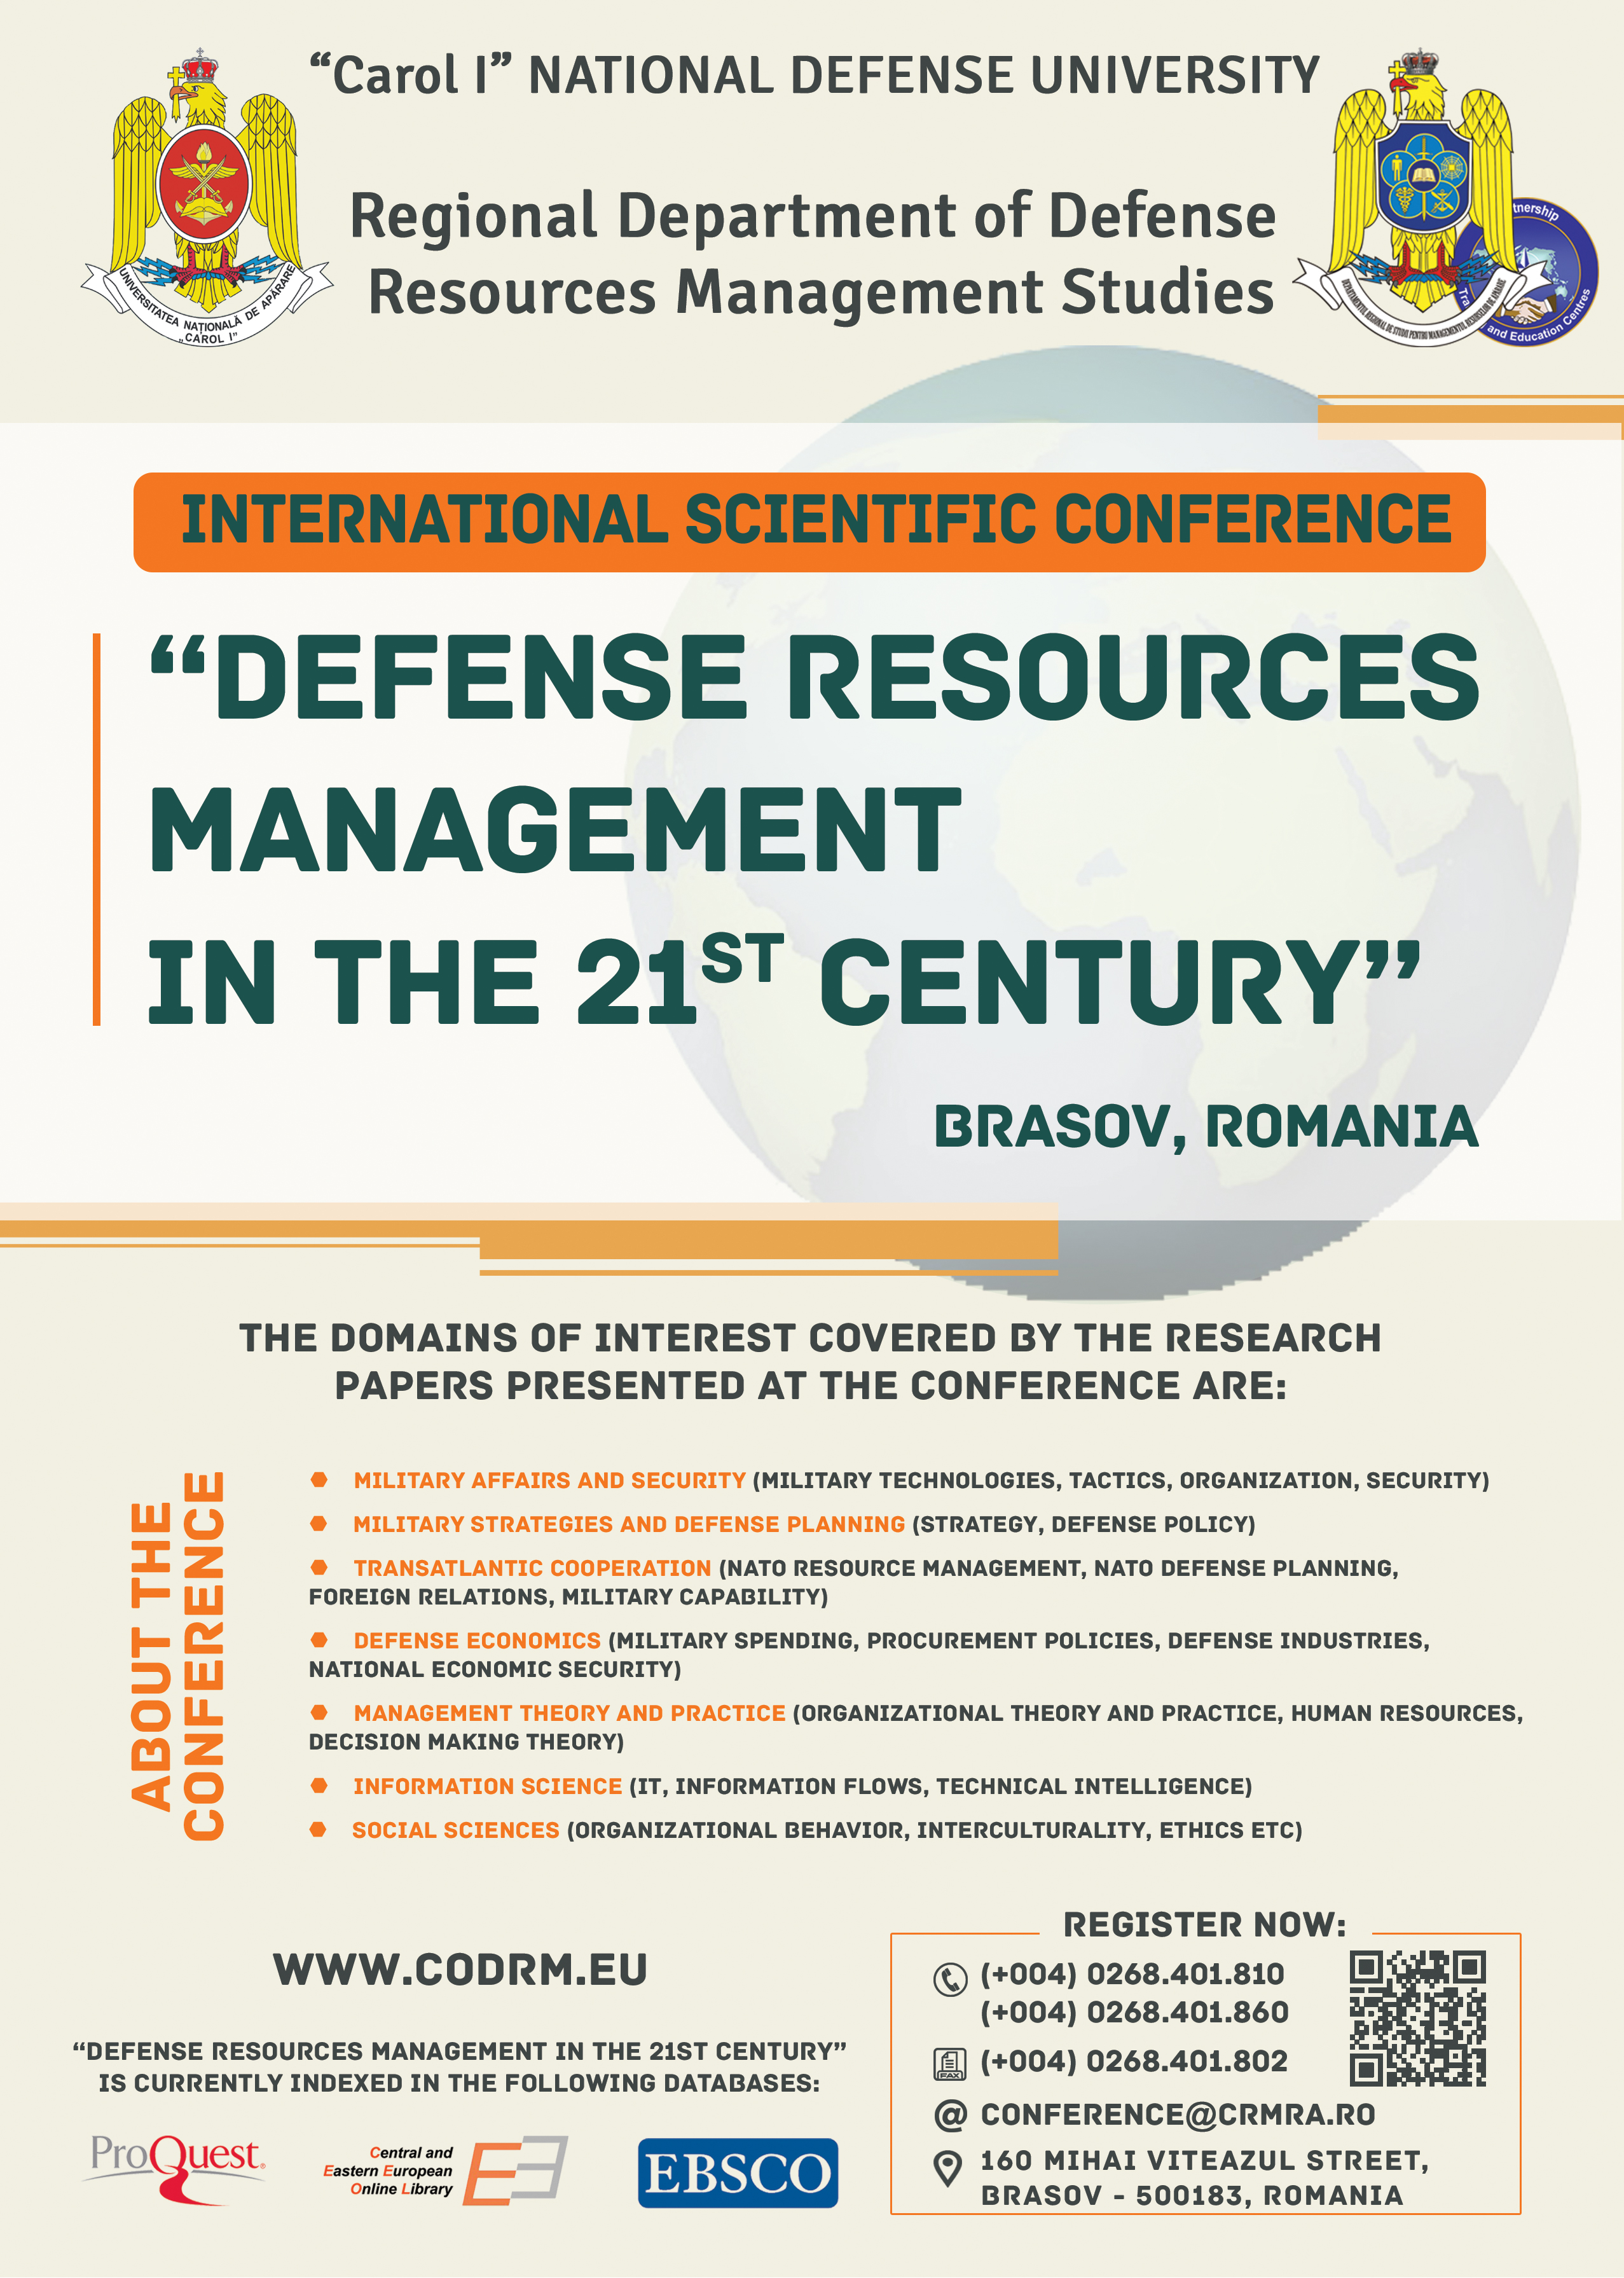 THE MAIN QUANTIFICATION INDICATORS OF THE IMPACT OF THE INTEGRATED DEFENSE RESOURCES MANAGEMENT UPON ACCOMPLISHMENT OF THE INTERNATIONAL MILITARY MISSIONS Cover Image